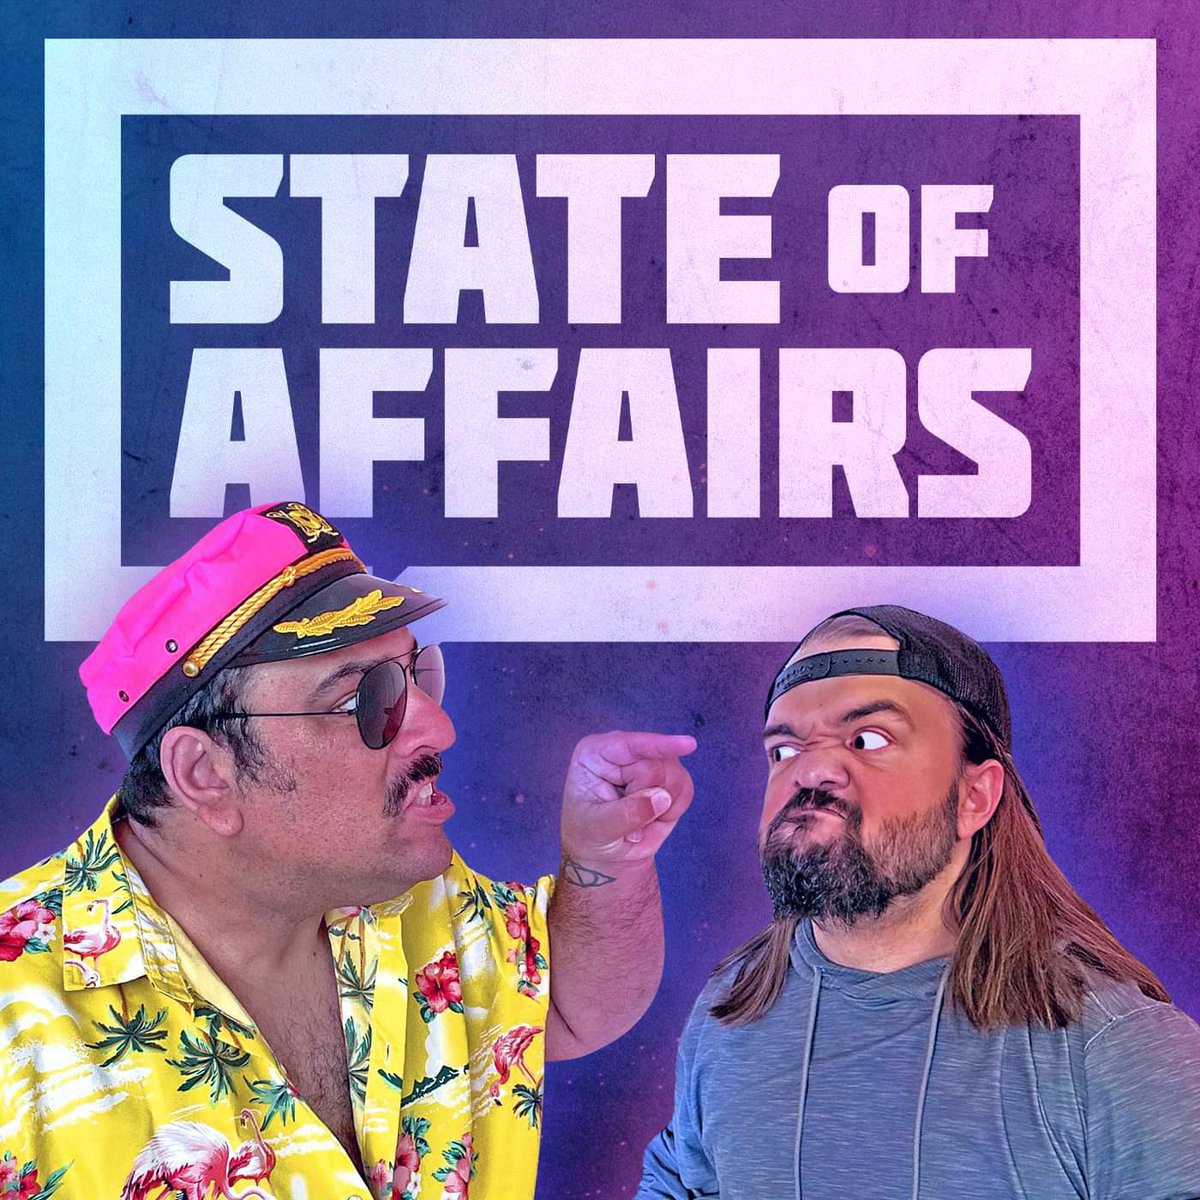 It’s the State of Affairs on Fast Food Restaurants! @DylanPostl & @TheJoeShoes break down their fave spots this week! Listen wherever you get podcasts or watch free on YouTube! YouTube: youtu.be/GrKVB5GBstQ?si… Apple: podcasts.apple.com/us/podcast/sta… Spotify: open.spotify.com/episode/3me6d3…